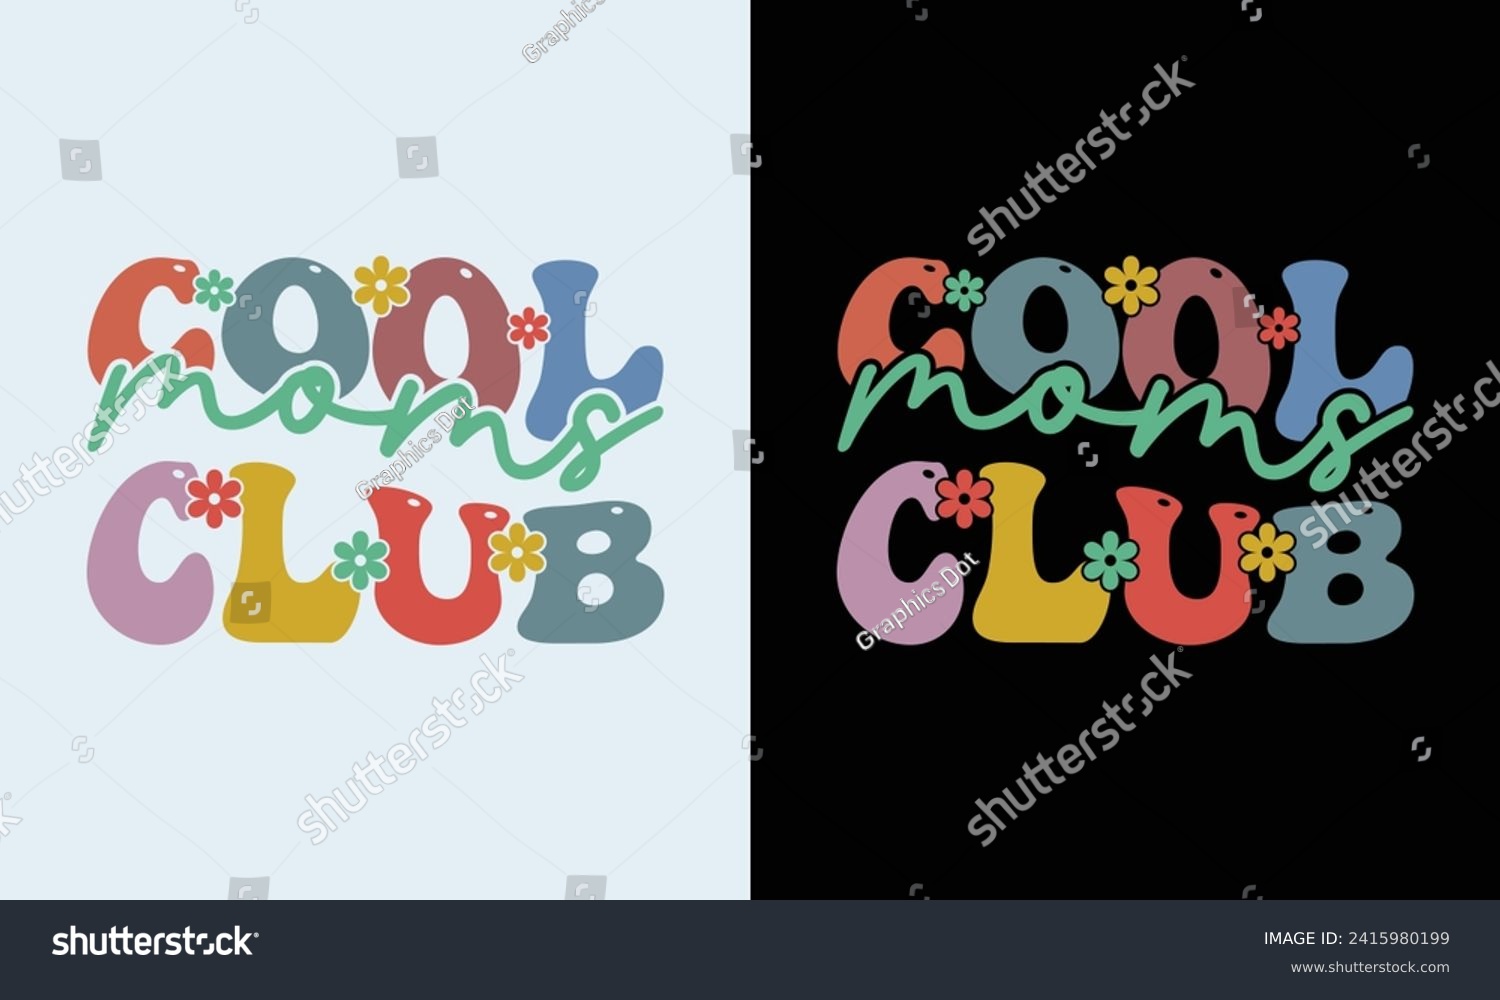 SVG of Cool moms club quote retro wavy colorful Design,Best Mom Day Design,gift, lover,Mom Cut File,Happy Mother's Day Design,Cool Moms Club Retro Design svg